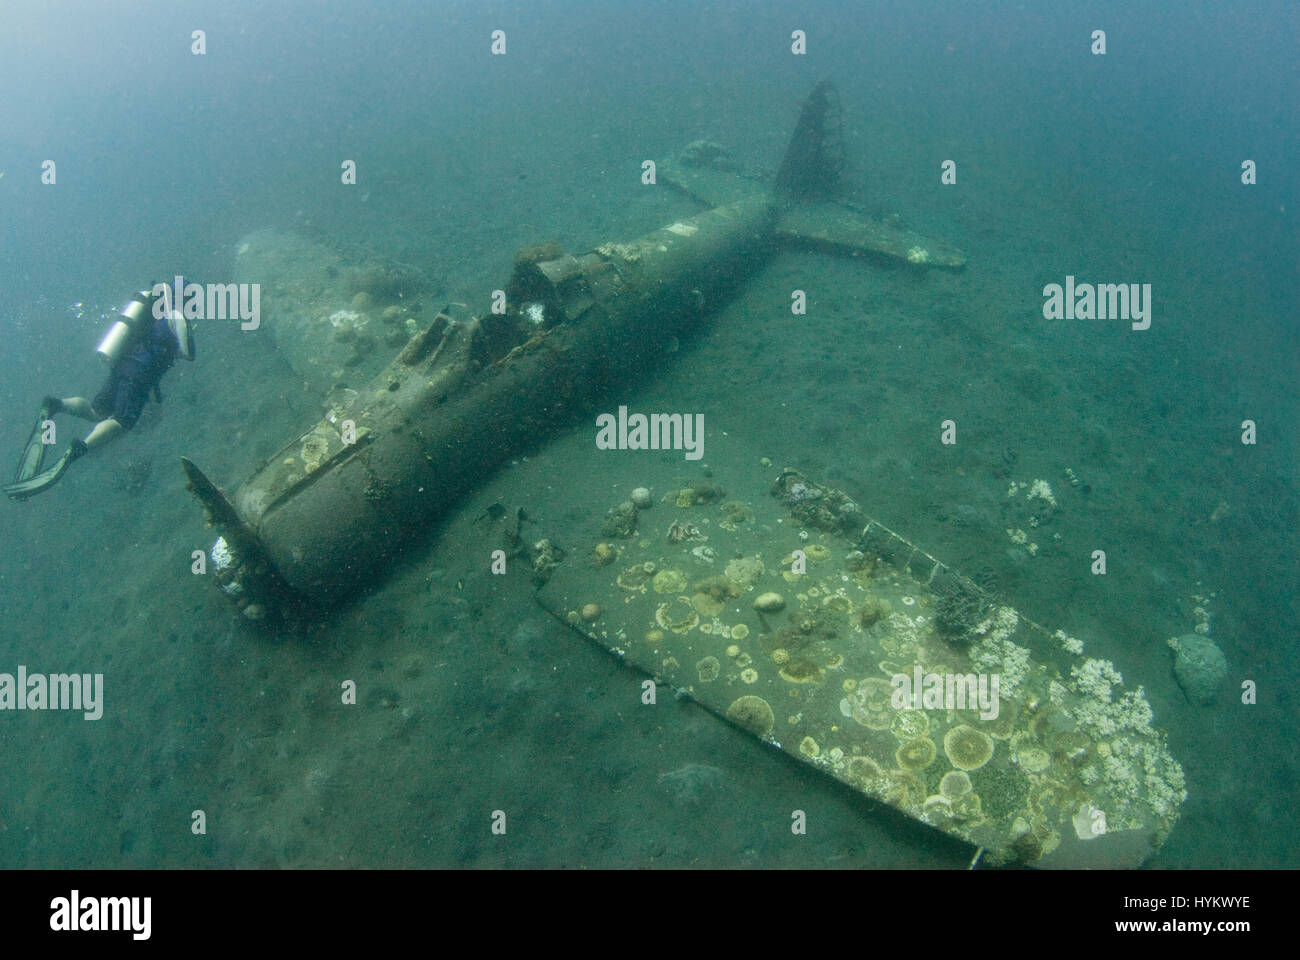 SOLOMON ISLANDS, PACIFIC OCEAN: A picture of a Mitsubishi A6M Zero long range fighter aircraft. THE REMNANTS of a fierce world war two battle have been captured at one hundred and eight five feet underwater. Pictures show these once powerful war machines, now lying dormant on the sea-bed.  A Japanese Mitsubishi A6M Zero long ranger fighter aircraft, an America Grumman F6F 3 Hellcat and a Boeing B-17 Flying Fortress are shown in various degrees of decay with colourful coral growing out from now their rusted shells, some of which included the human remains of the tragic crewmen (not pictured). C Stock Photo